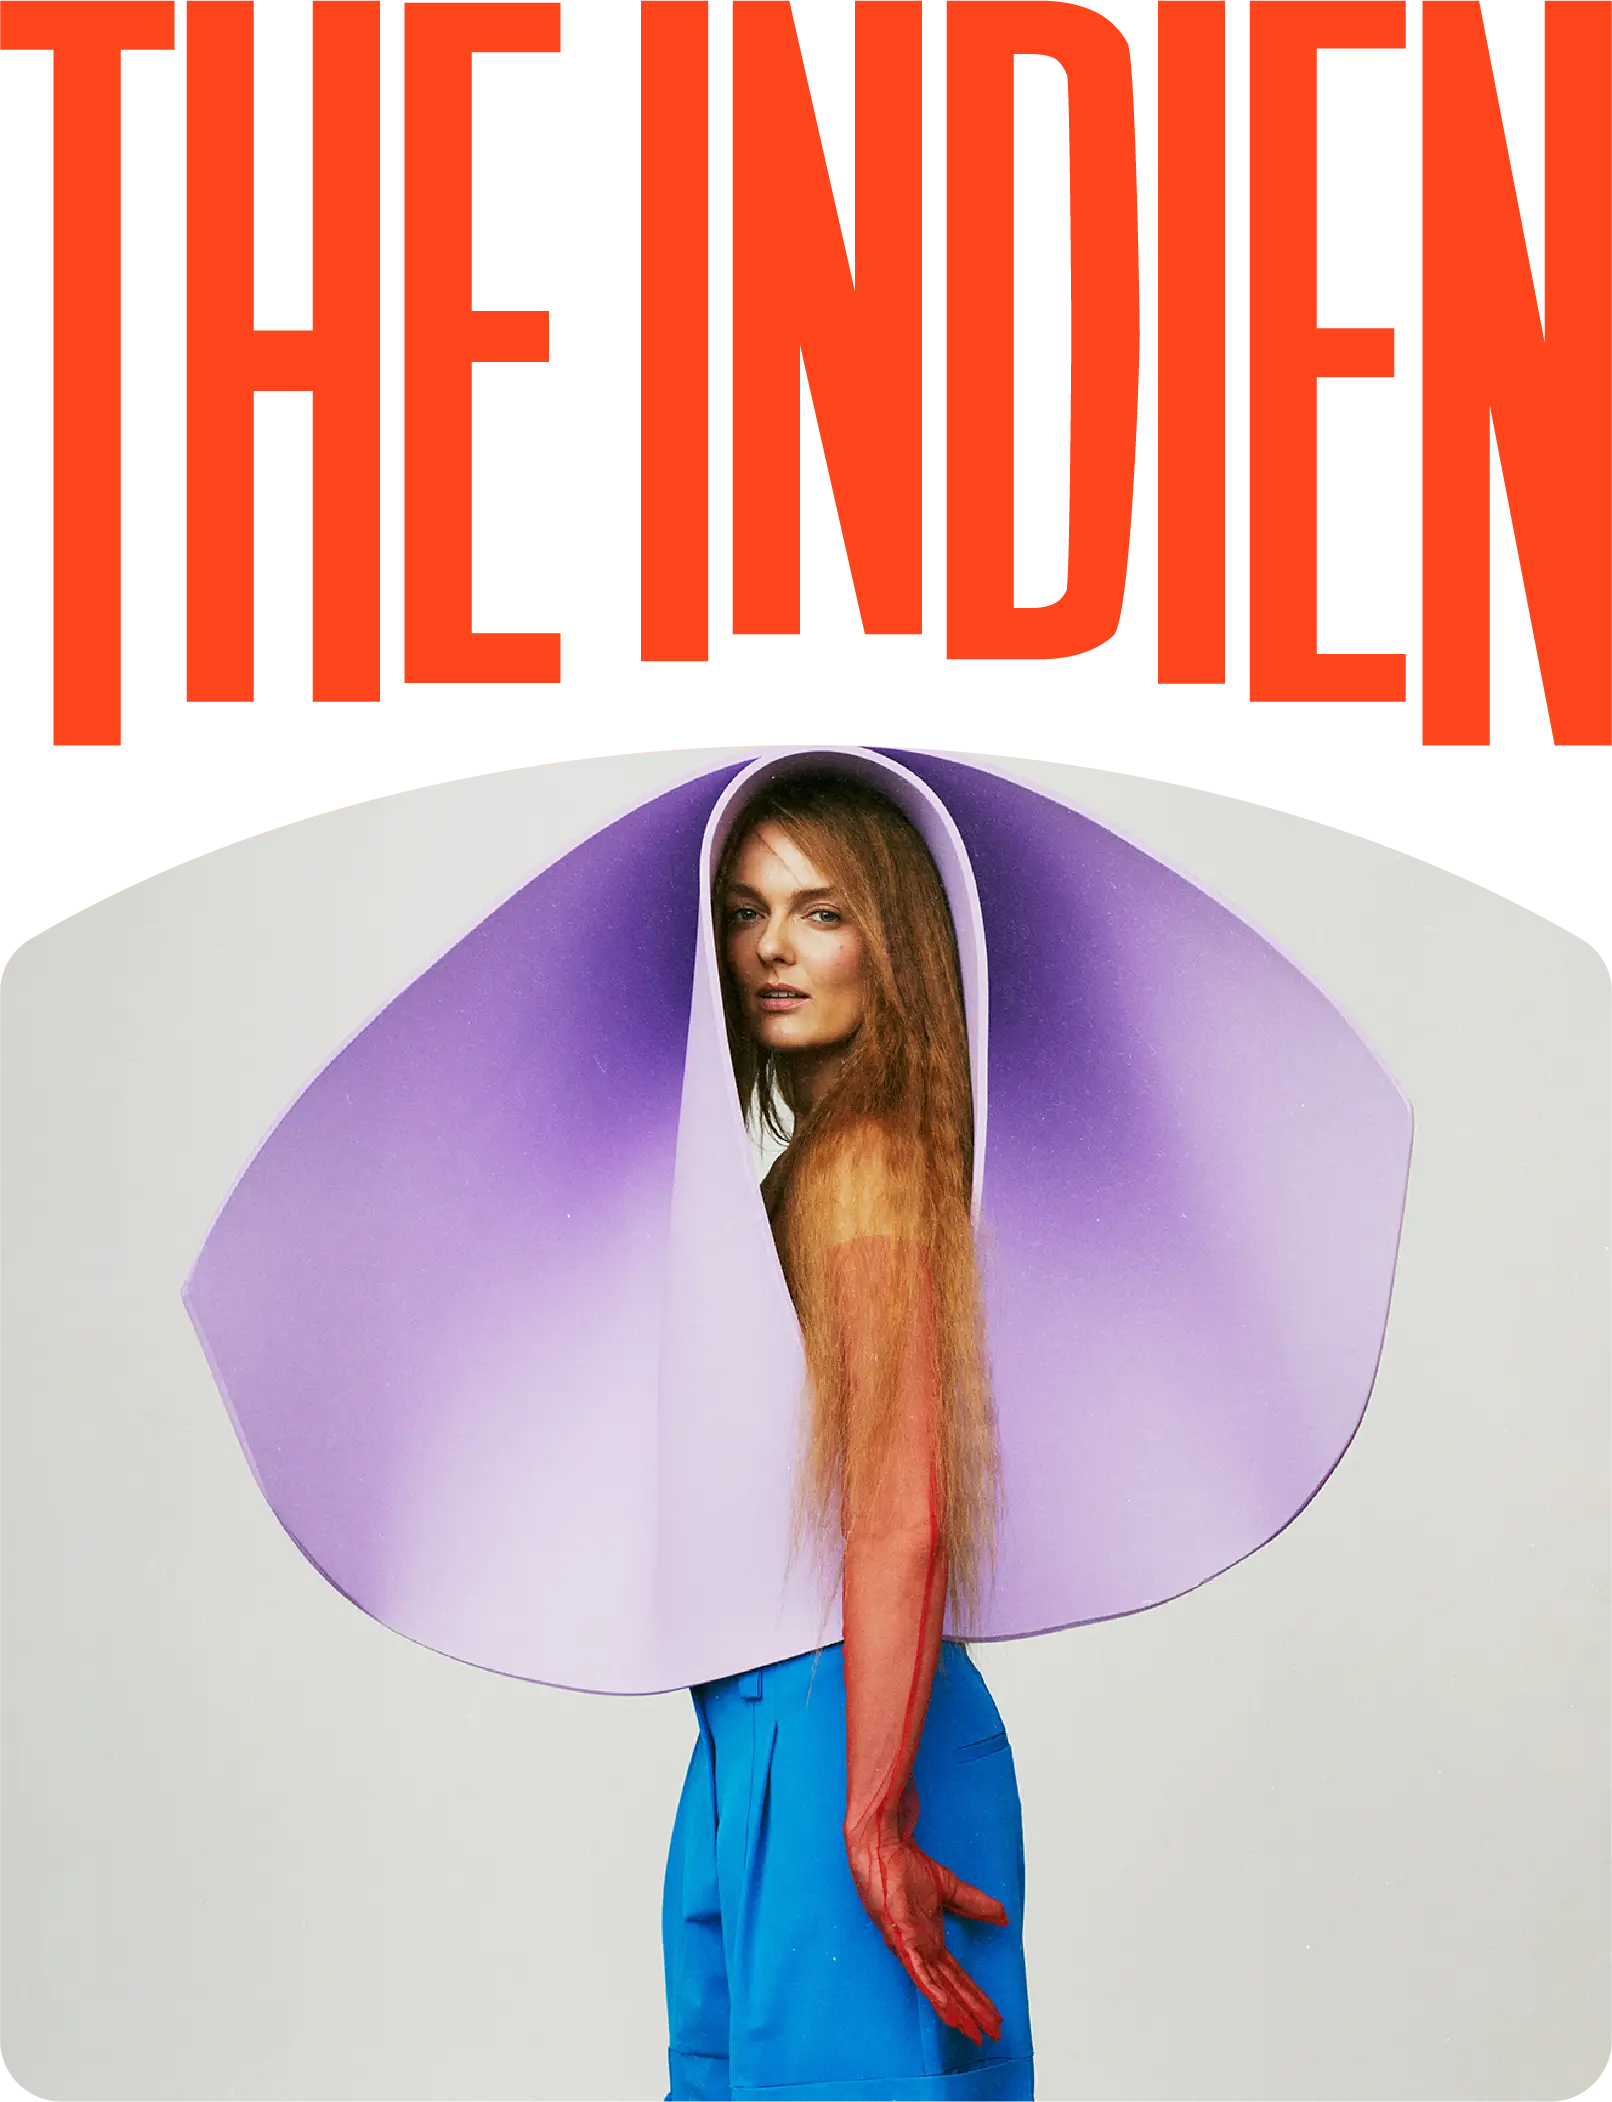 The Indien